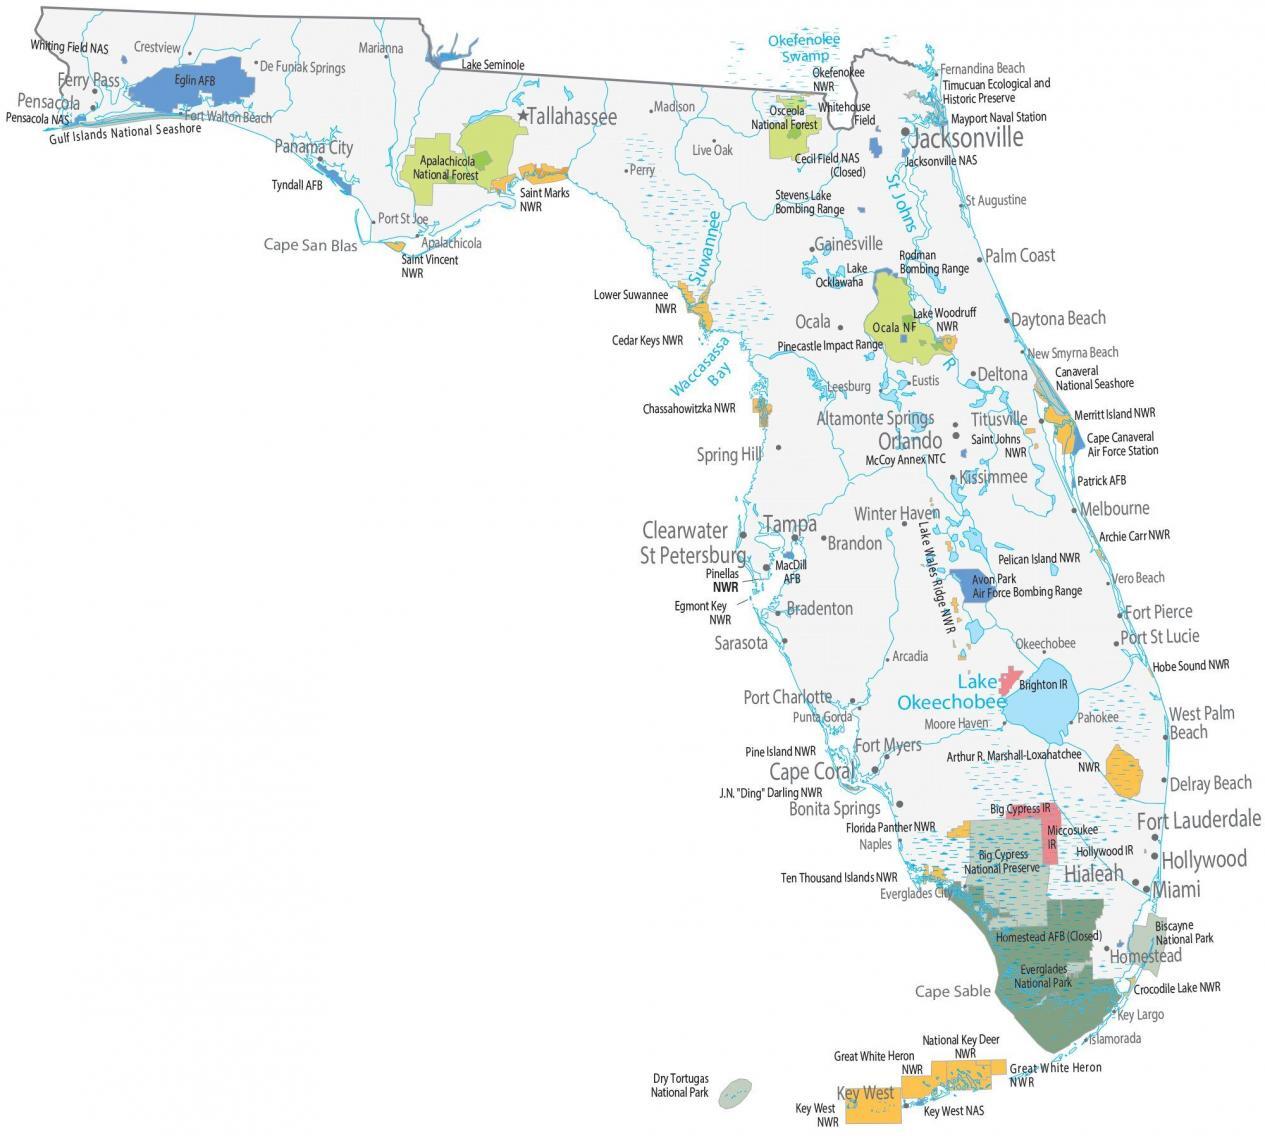 Florida State Map - Places and Landmarks - GIS Geography